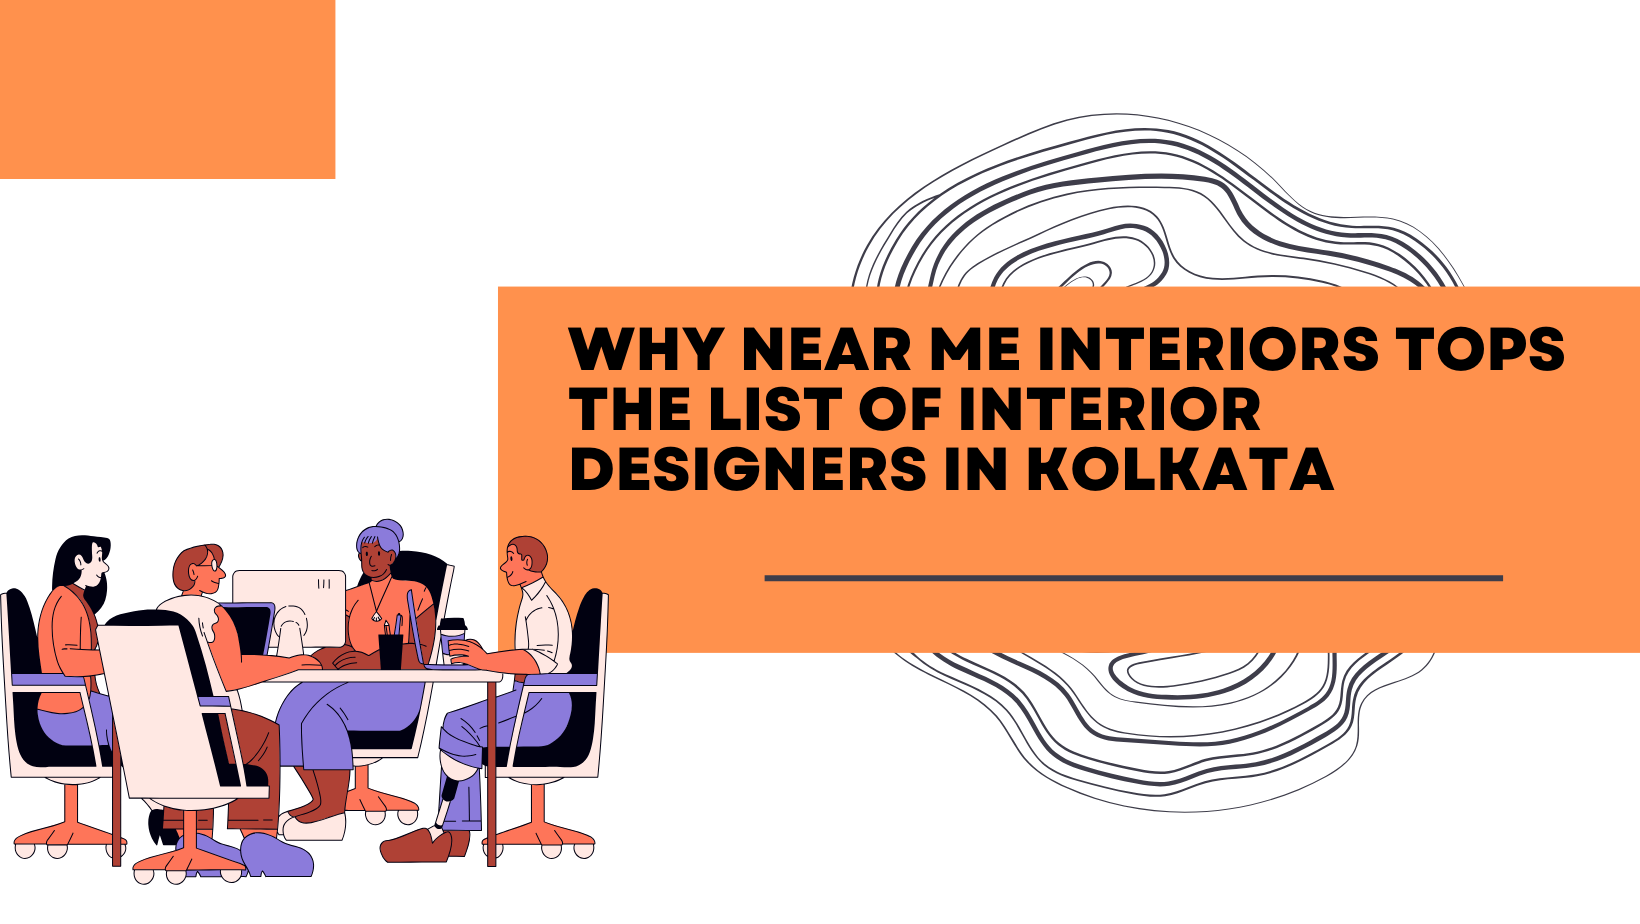 Why Near Me Interiors Tops the List of Interior Designers in Kolkata